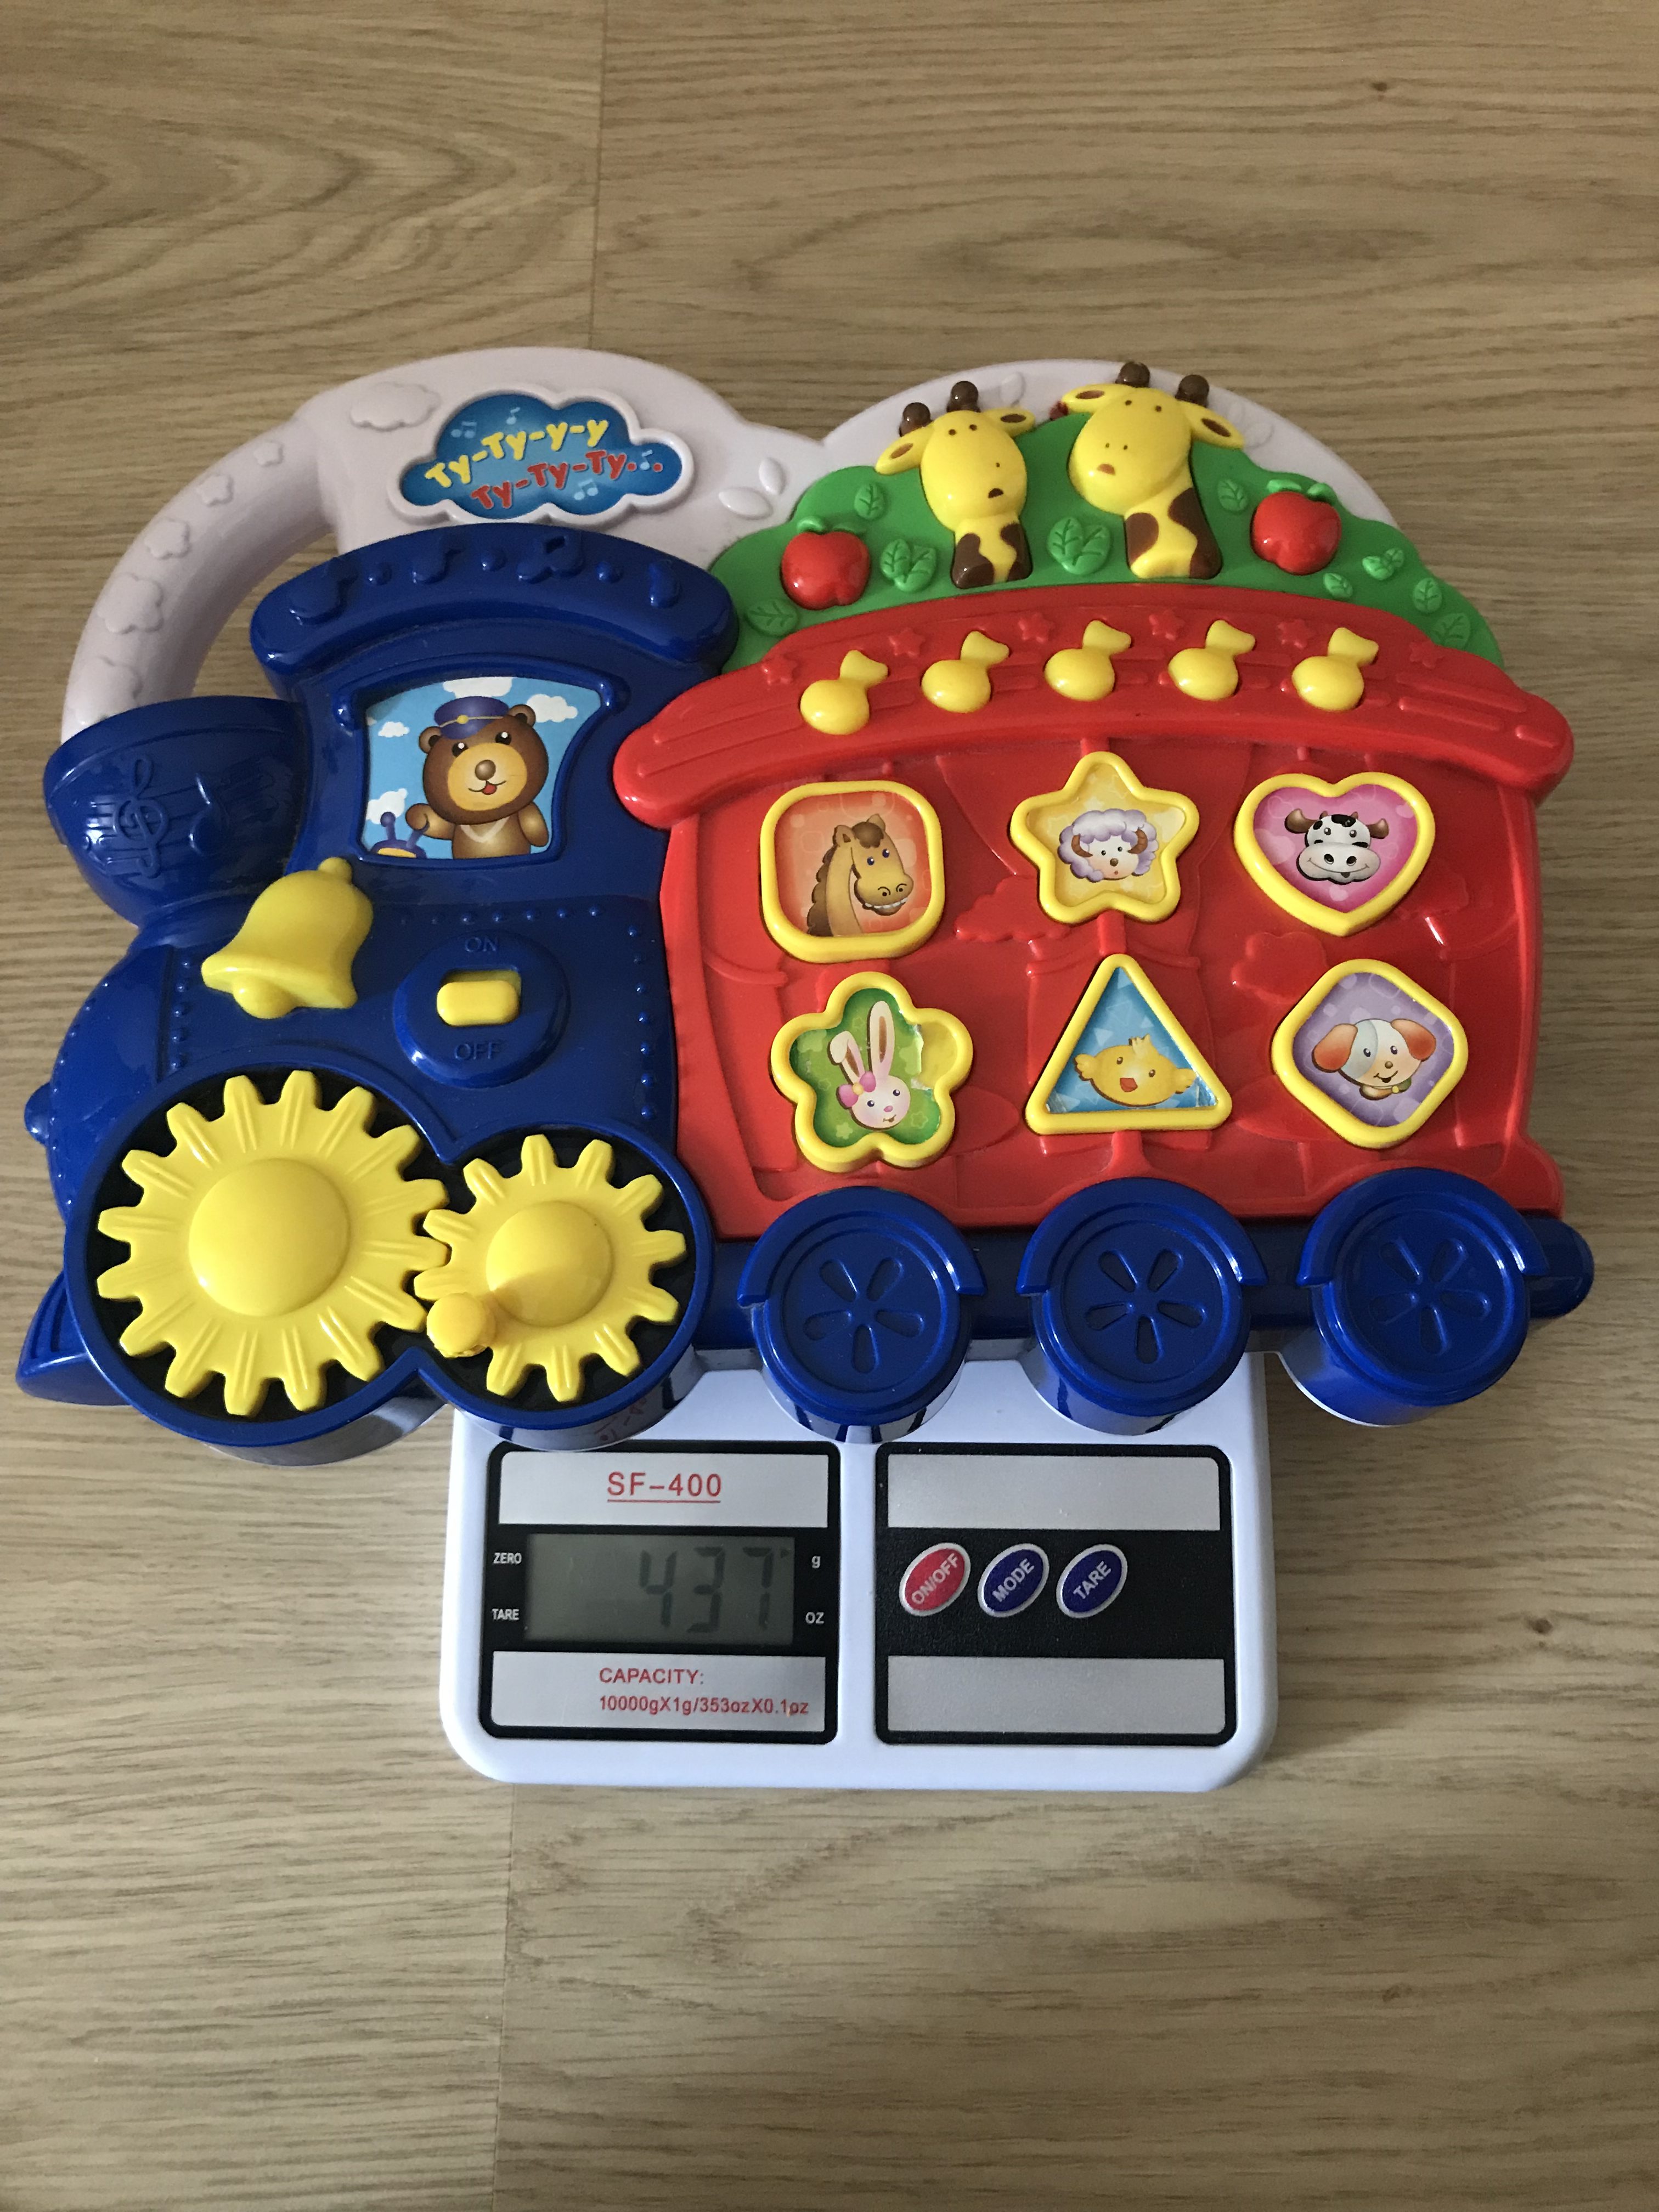 How much does a children's musical toy weigh (without batteries)?